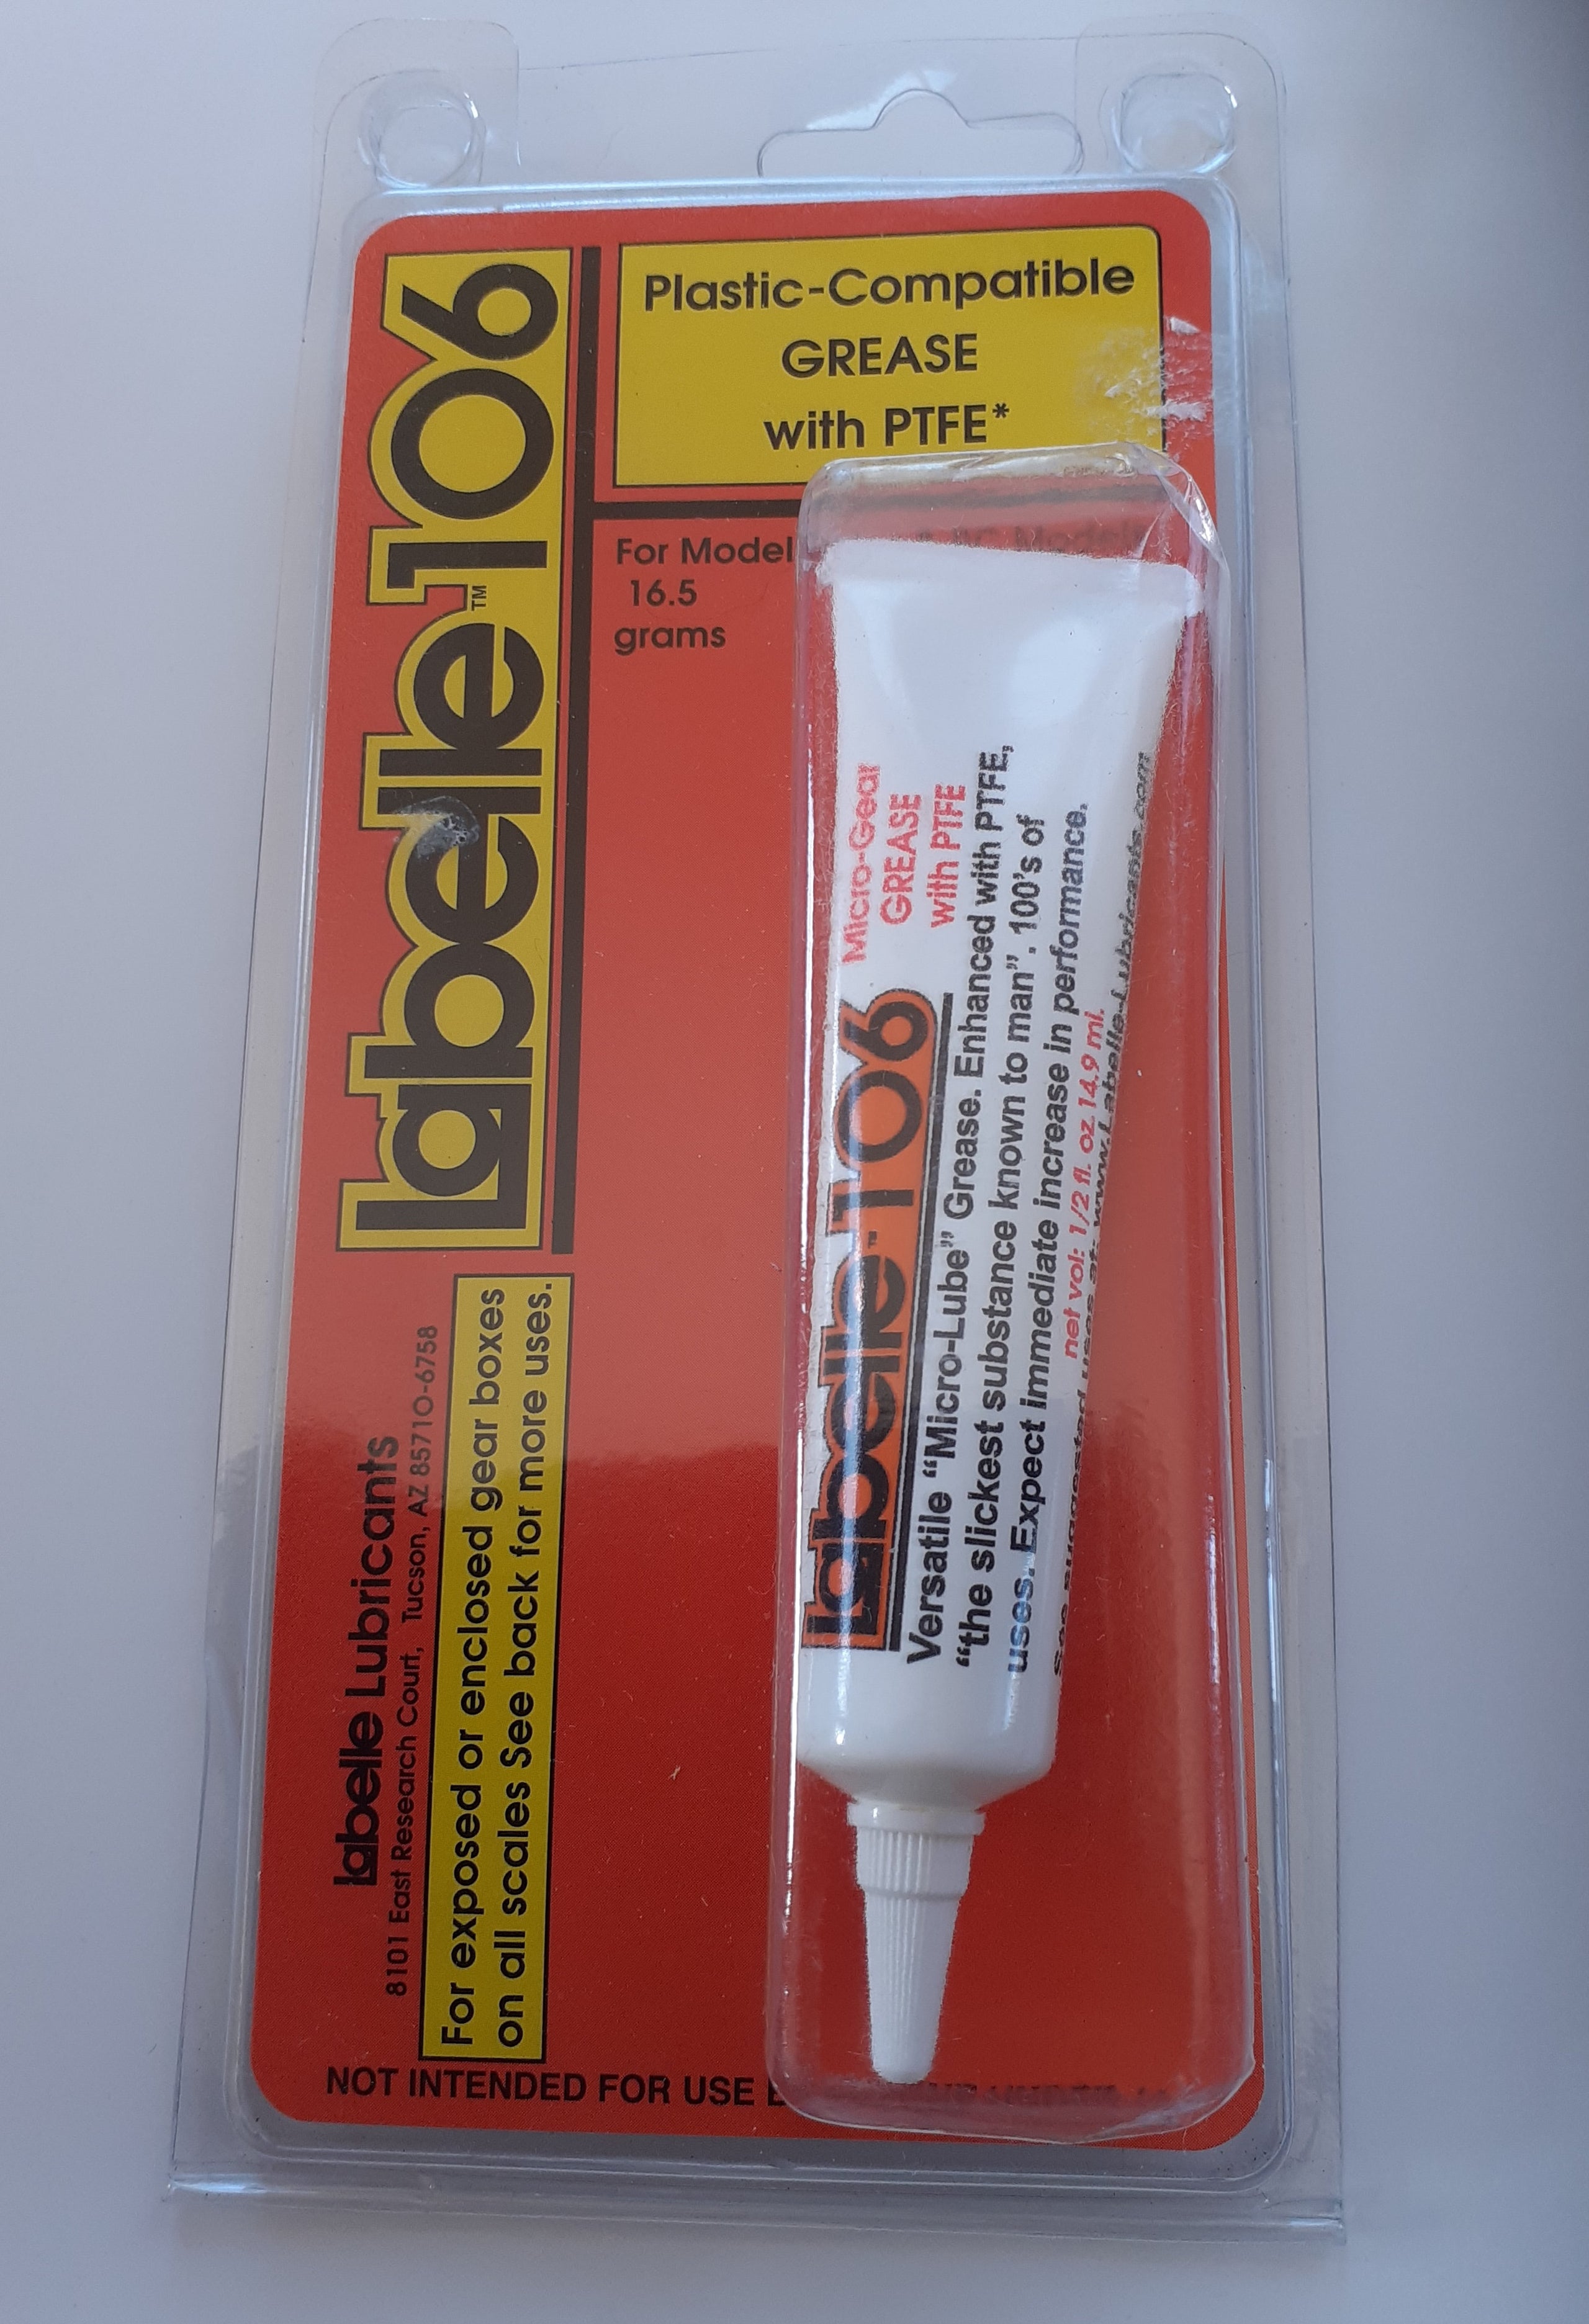  Fishing Reel Oil and Grease with PTFE* for All Types